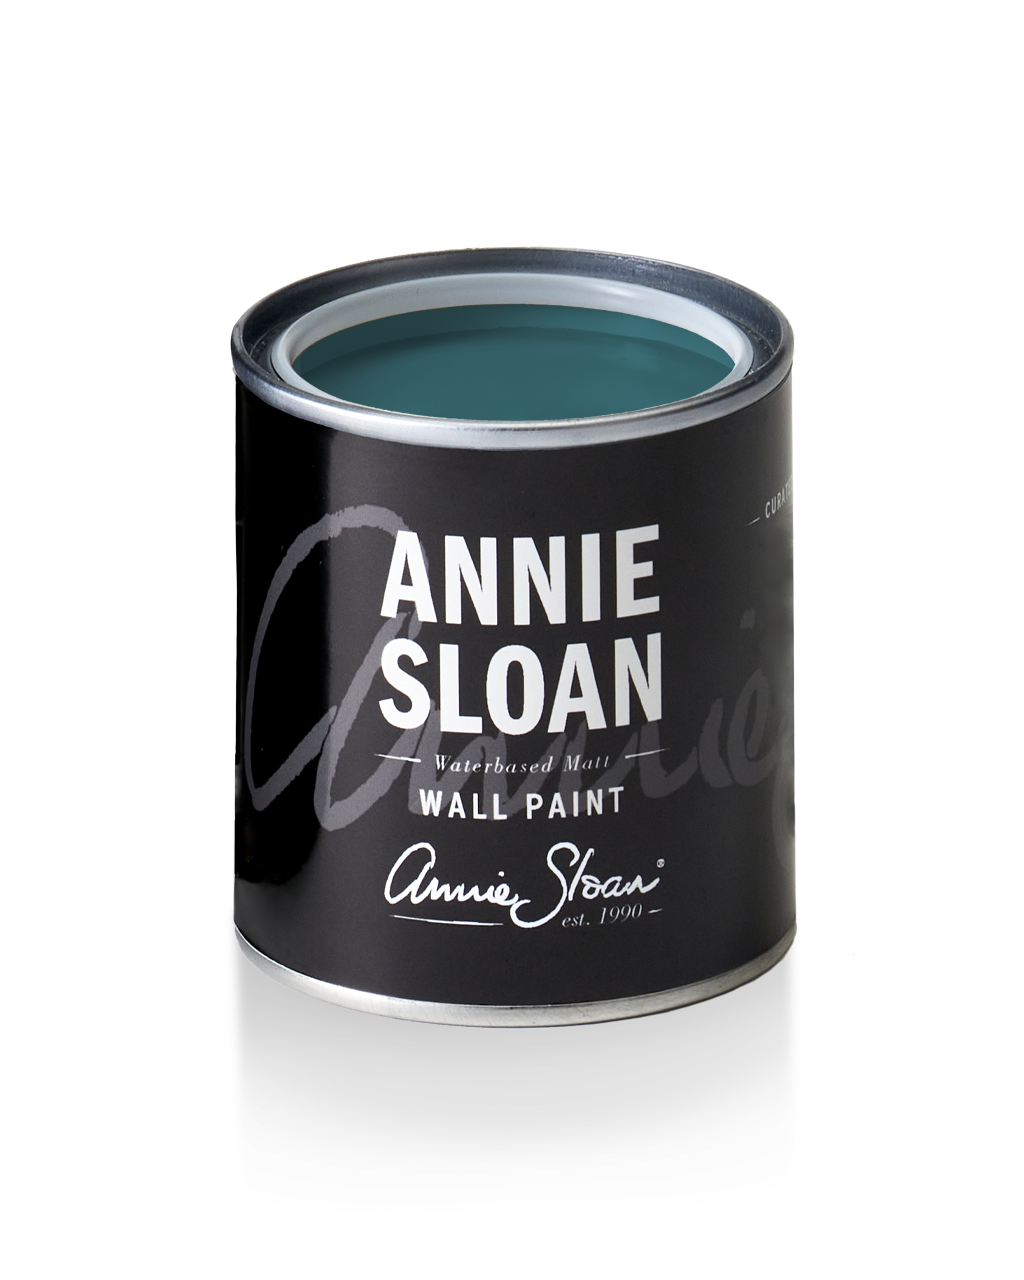 120mll tin of Aubusson wall paint by Annie Sloan